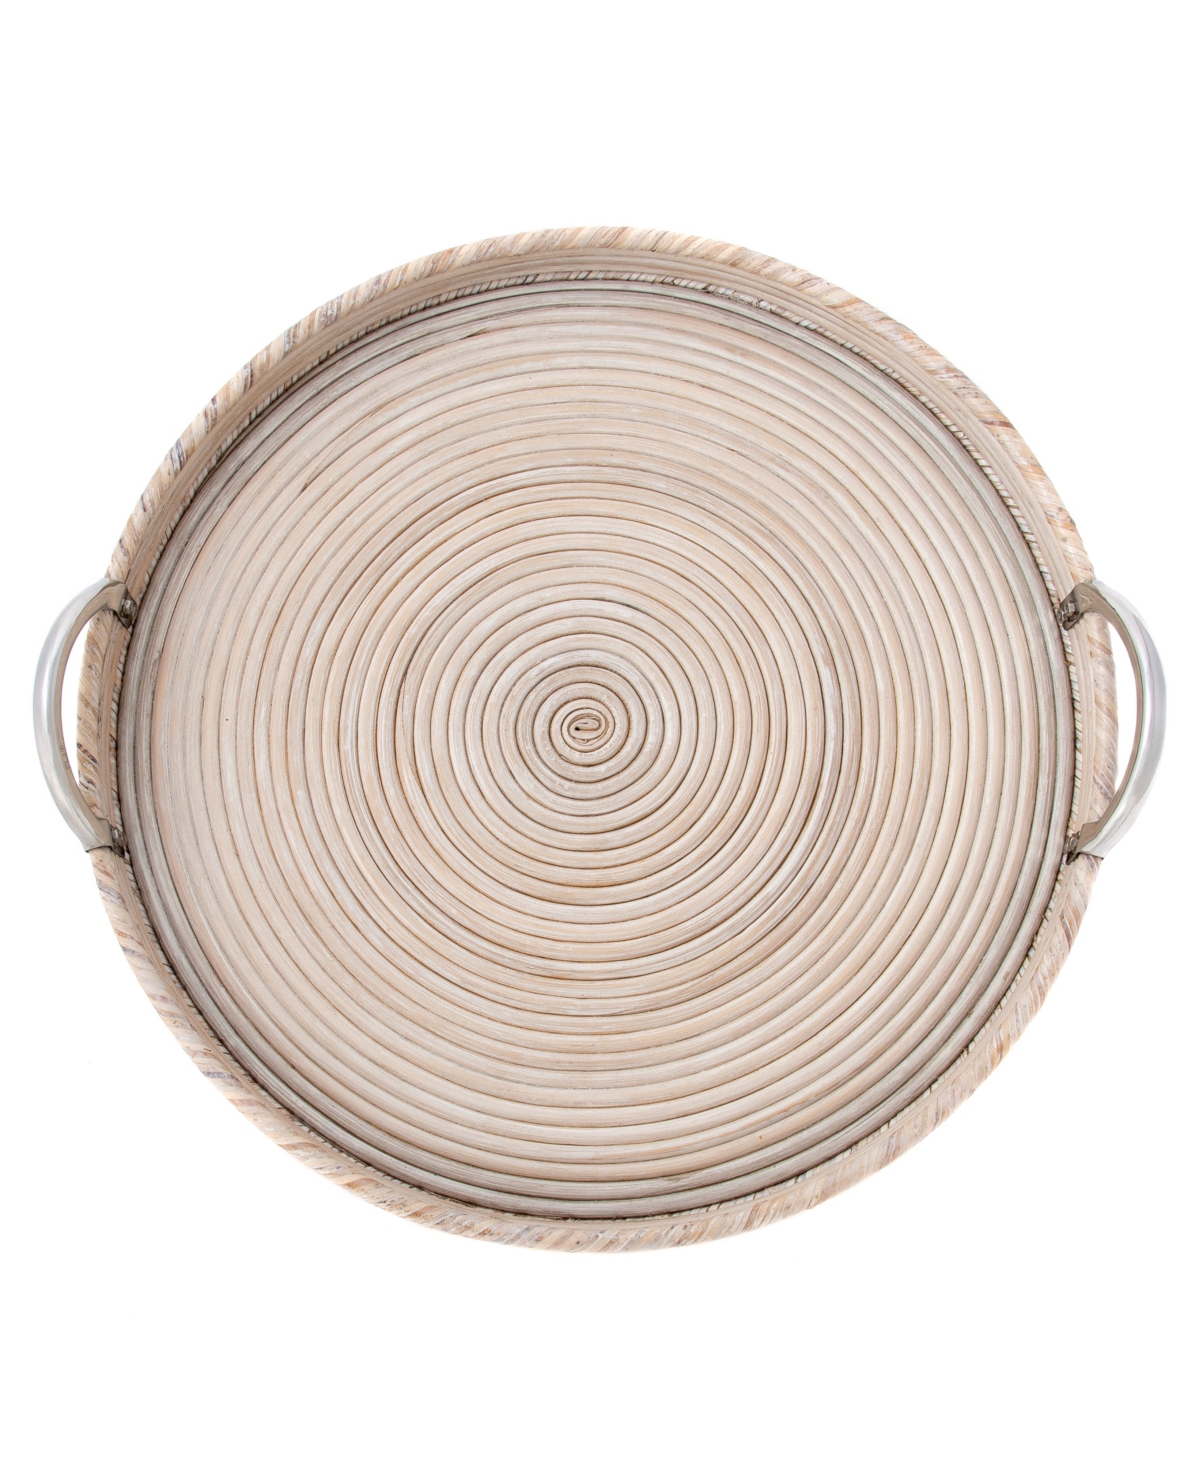 Shop Artifacts Trading Company Artifacts Rattan Sattu Collection Round Tray In Off-white